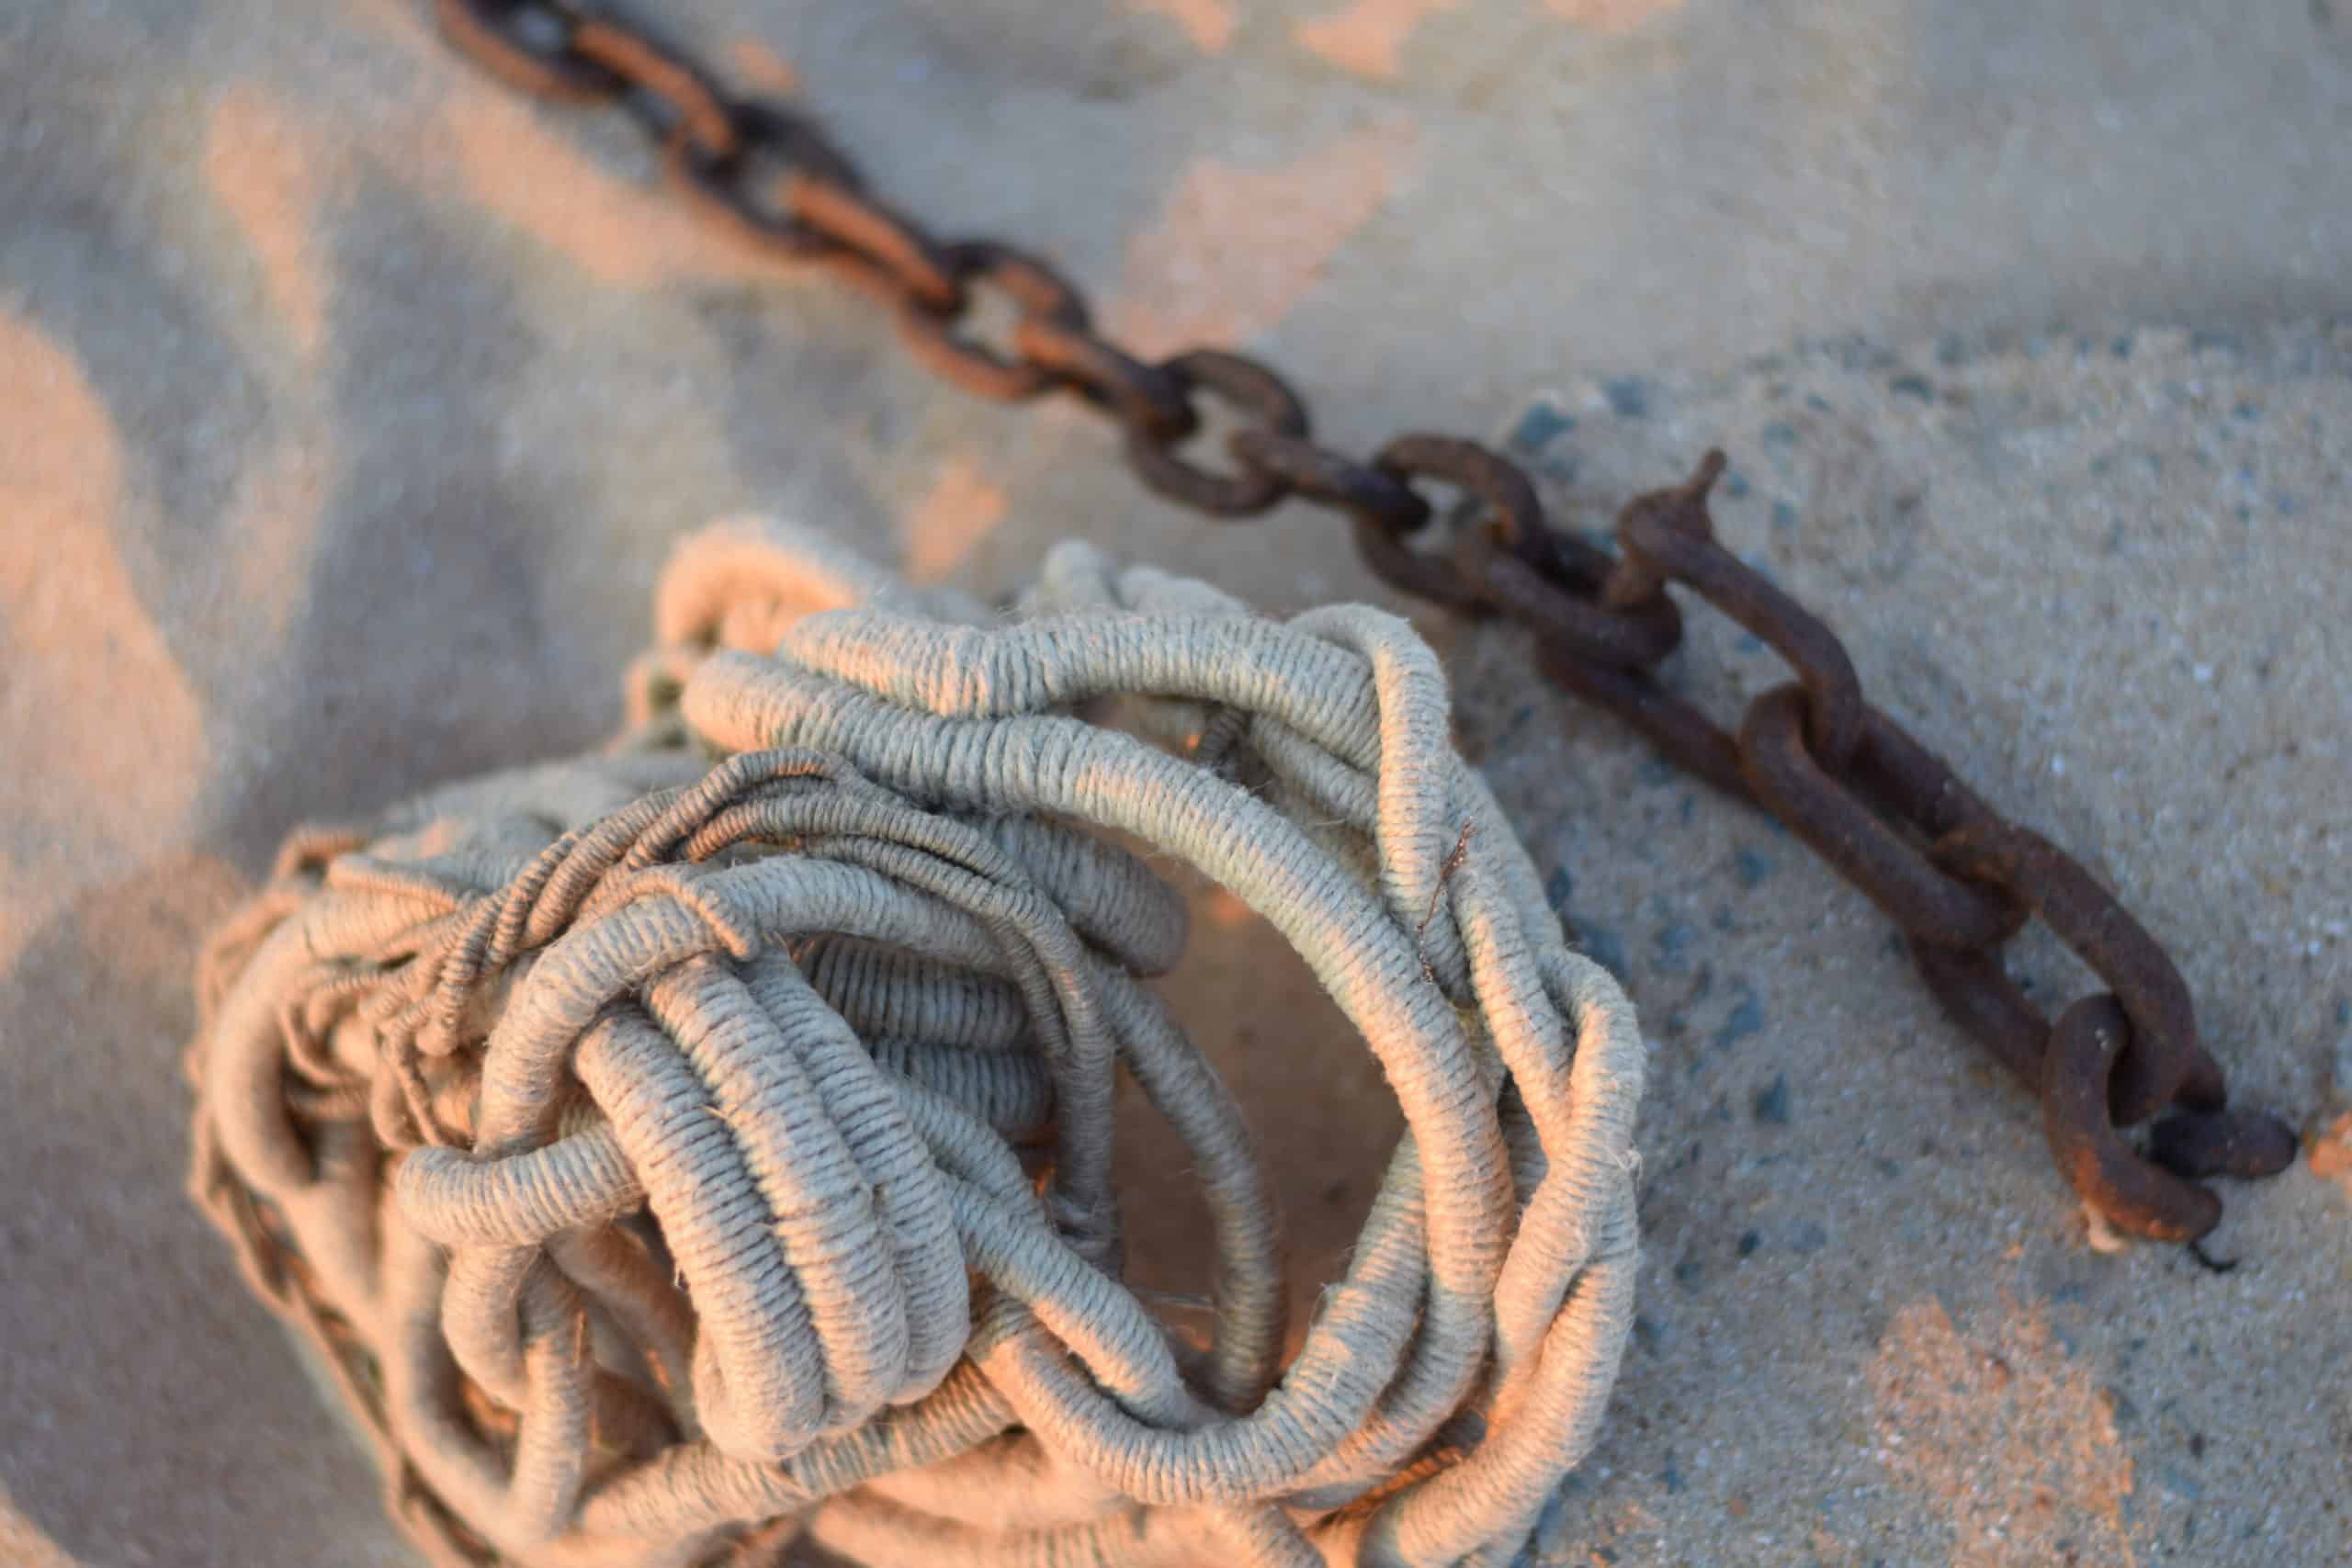 Undyed sculpture by Aude Franjou on a beach next to an anchoring chain